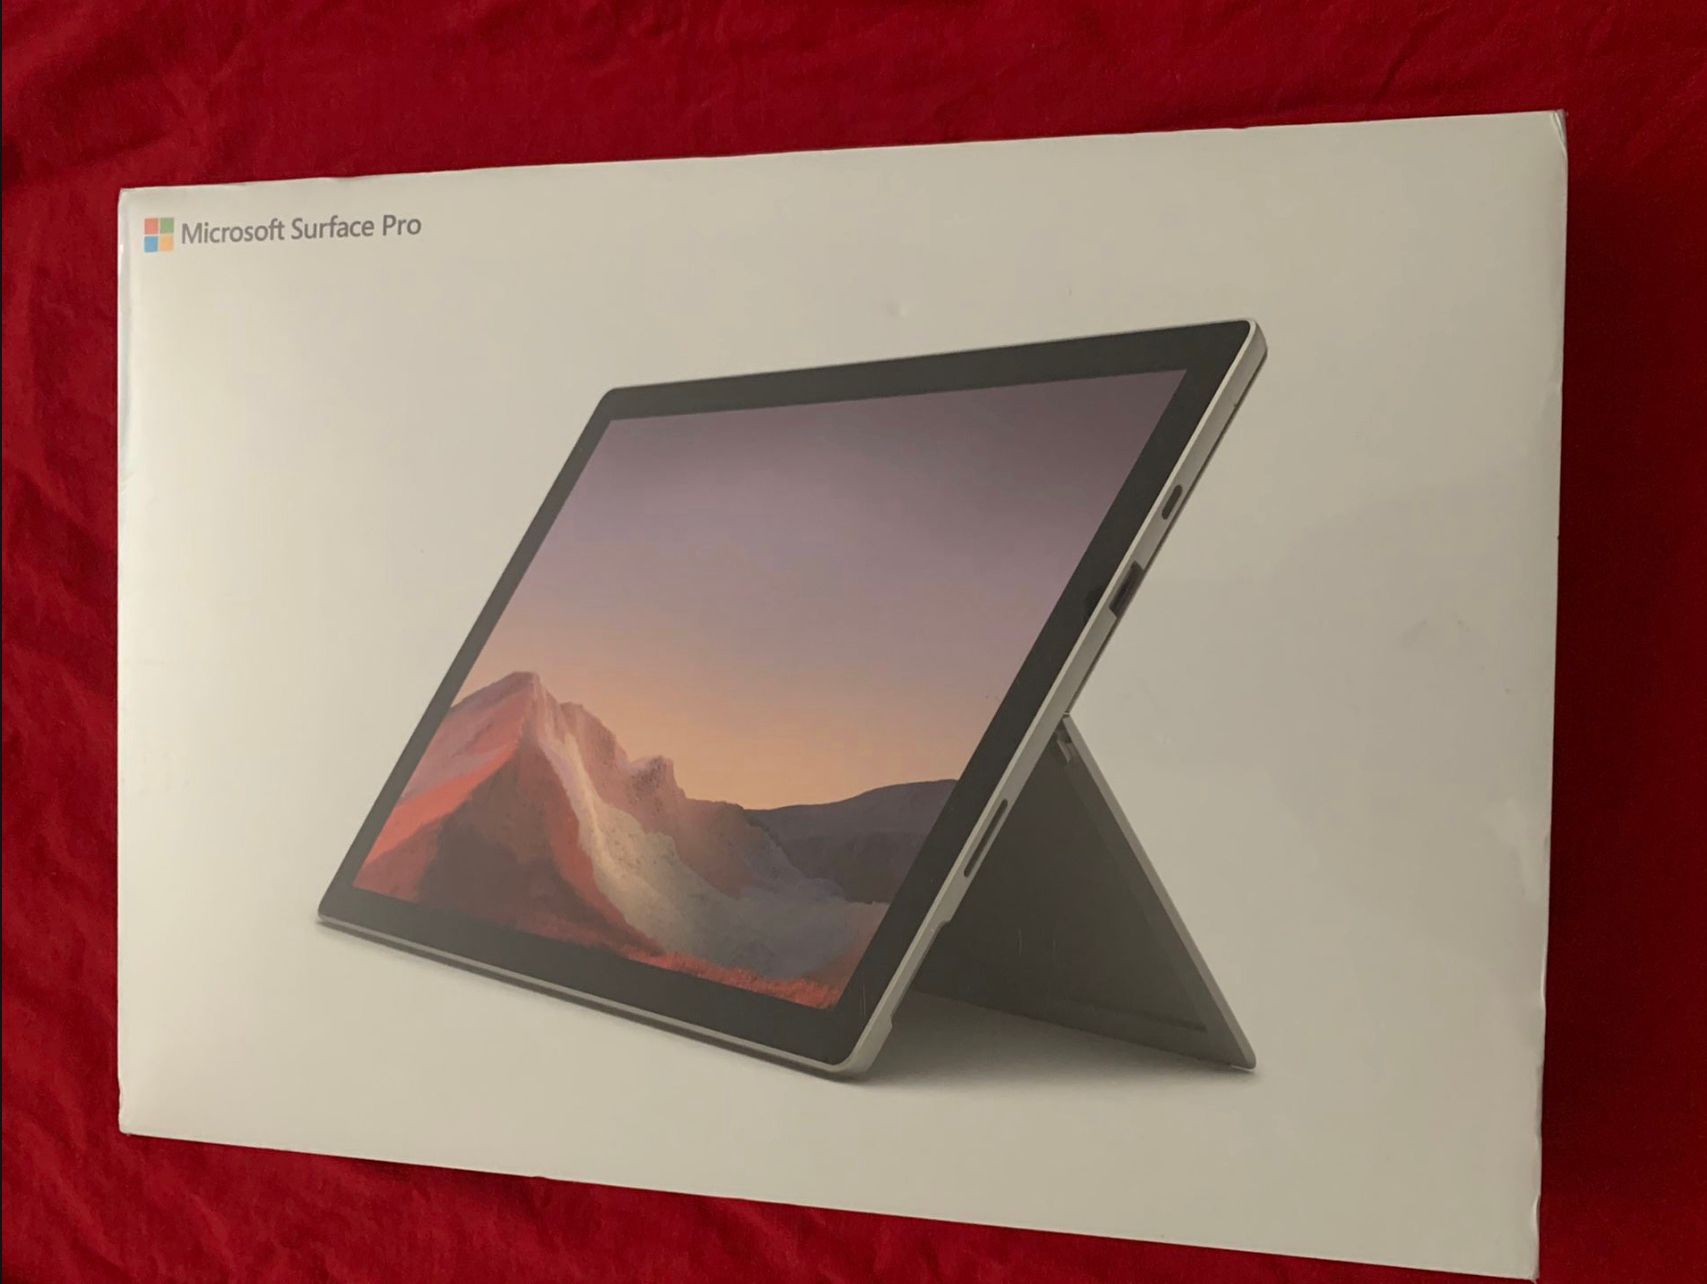 Microsoft Surface Pro 7 New Sealed i5 8gb 256gb 12.3 Inch Screen I Can Deliver For Sale Or Trade For iPhone 14 Pro Max Verizon 